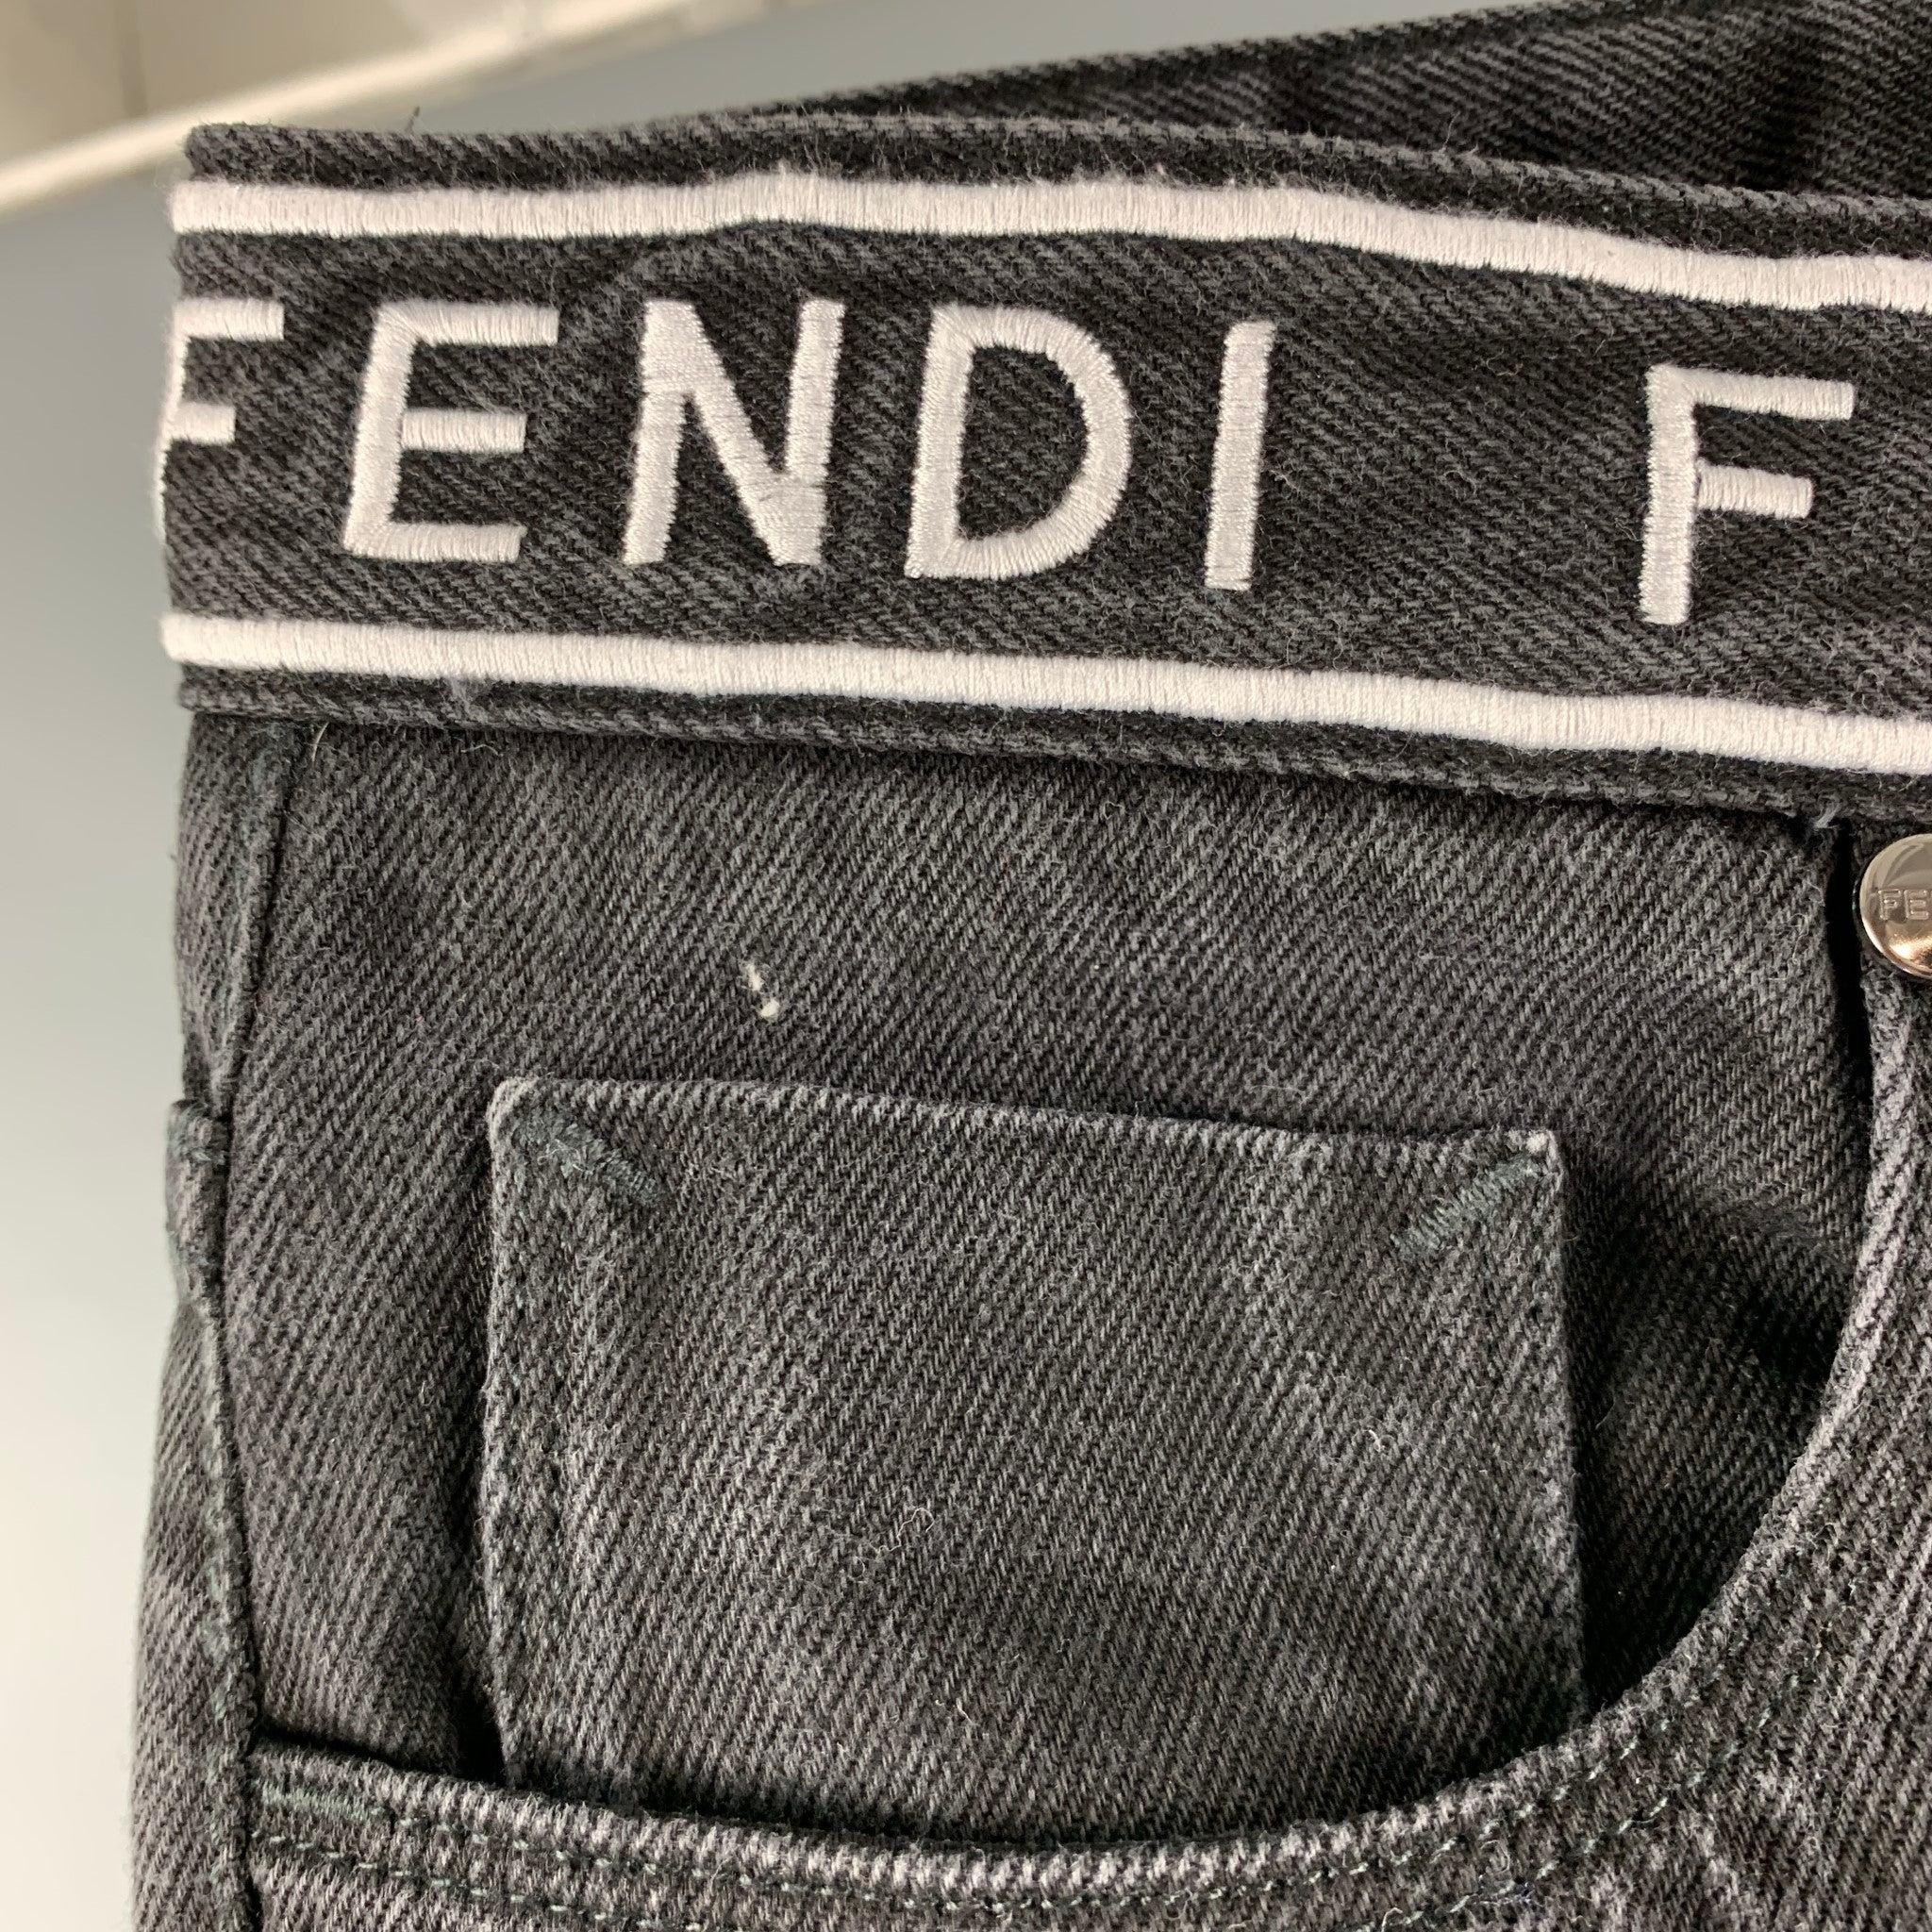 FENDI comes in a black cotton denim featuring a slim fit, logo waistband, and a zip fly closure. Made in Italy.Excellent Pre-Owned Conditions. 

Marked:   33/34 

Measurements: 
  Waist: 33 inches Rise: 9.5 inches Inseam: 32 inches  
  
  
